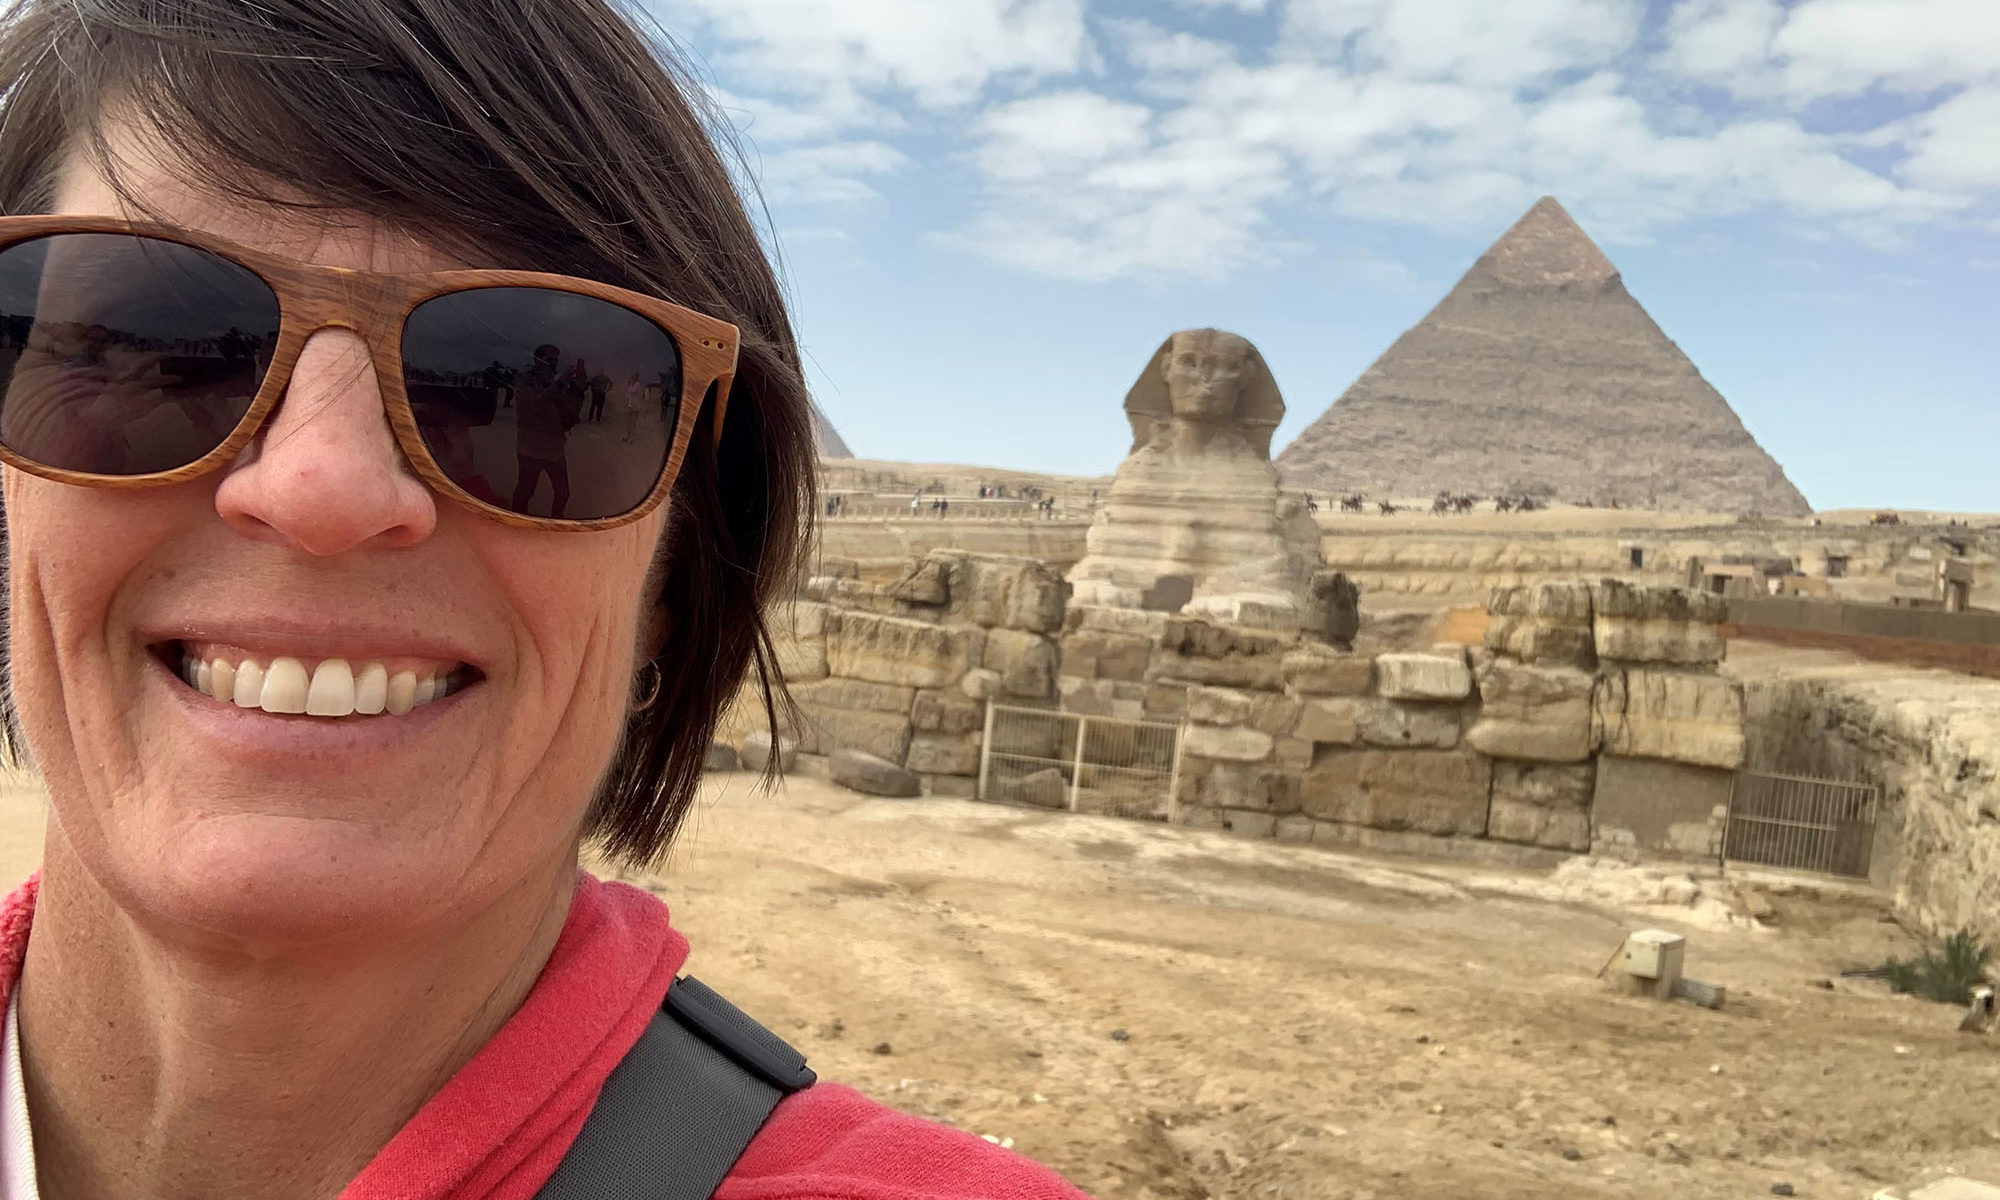 Marcy Souza in Egypt poses in front of the sphynx and a pyramid.